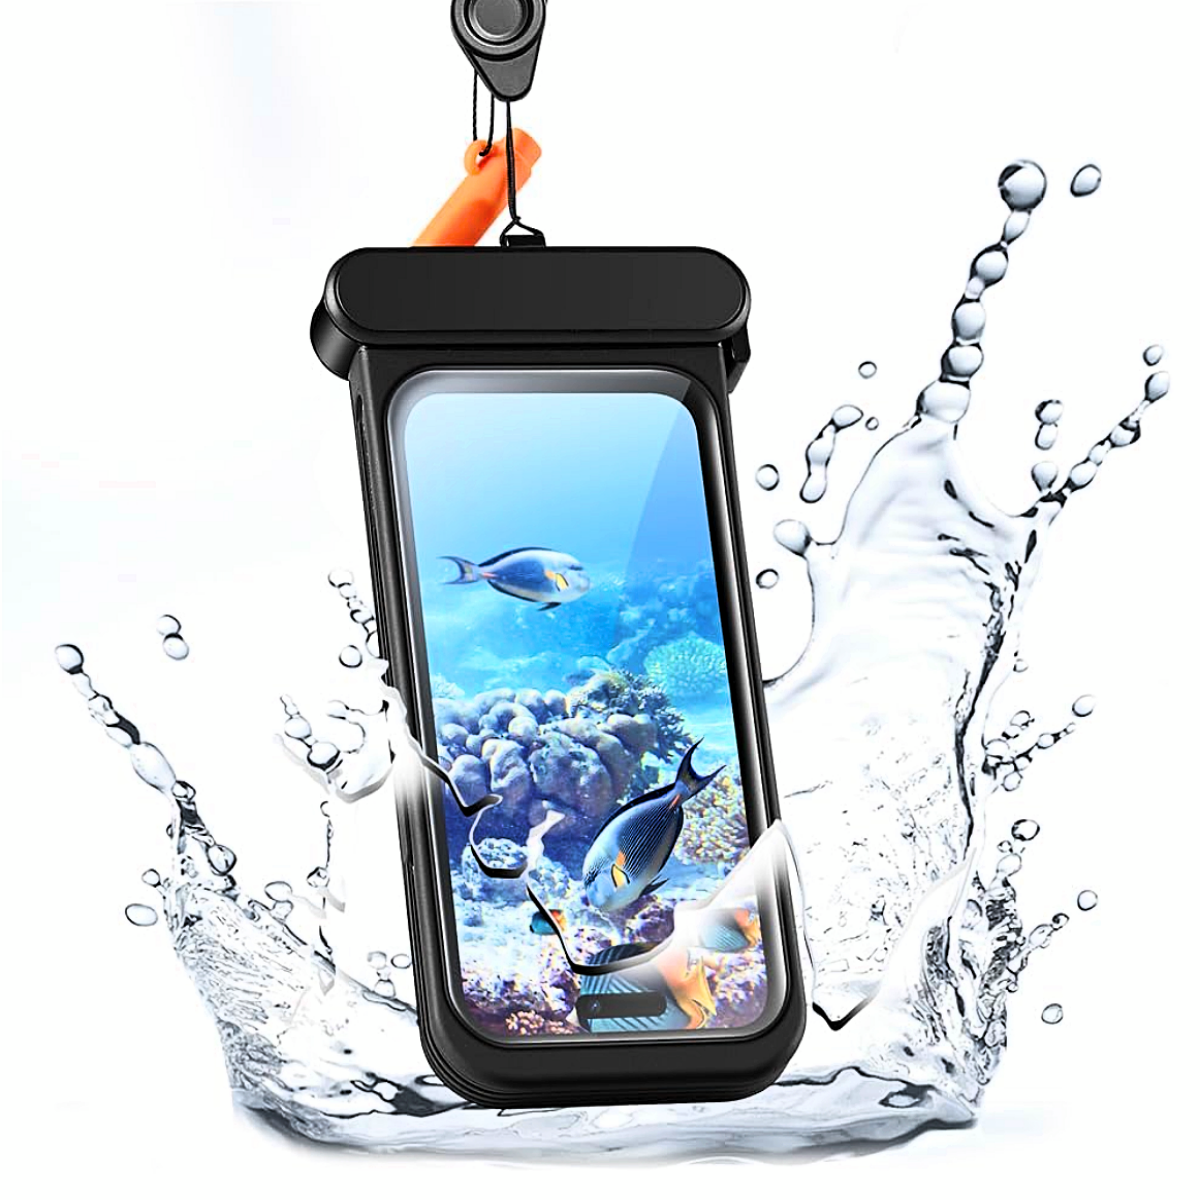 ESR Waterproof Pouch for iPhone